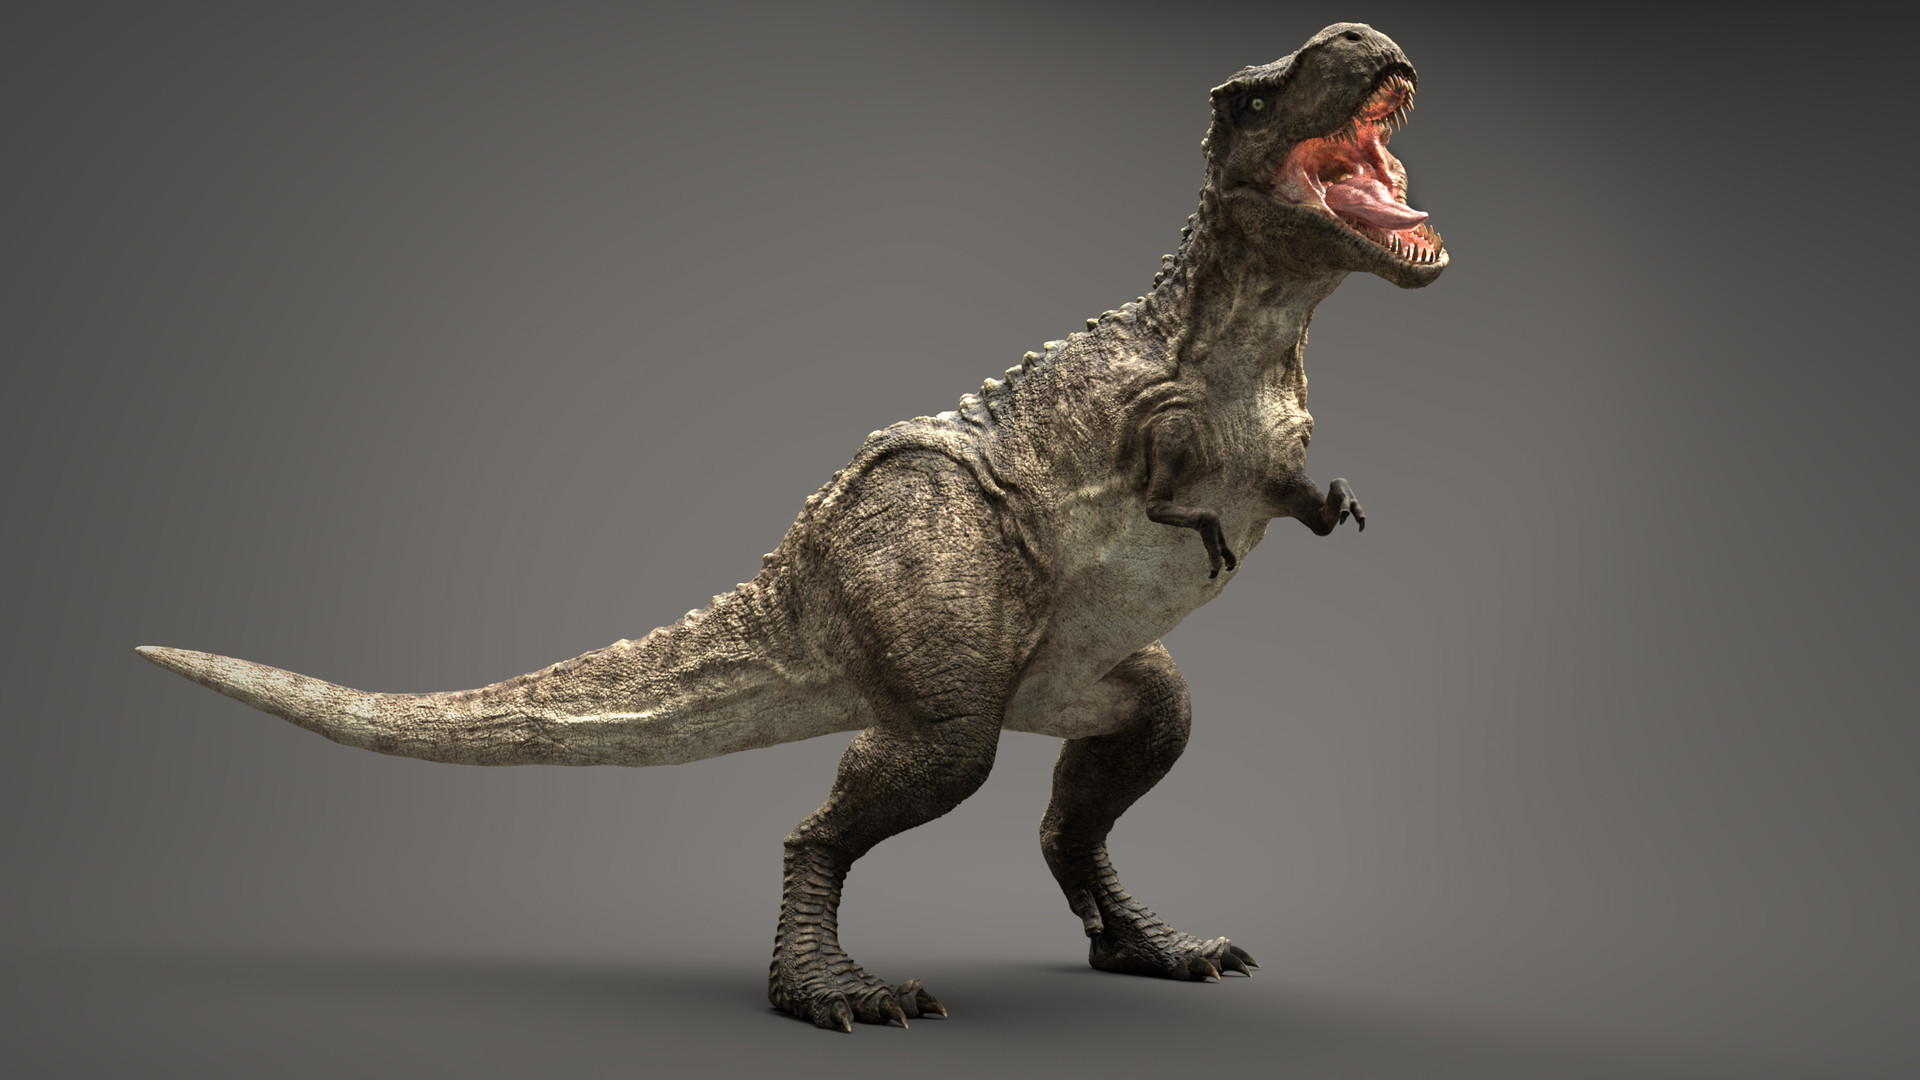 providing a realistic and lifelike appearance. The Spinosaurus is portrayed  in a dynamic pose